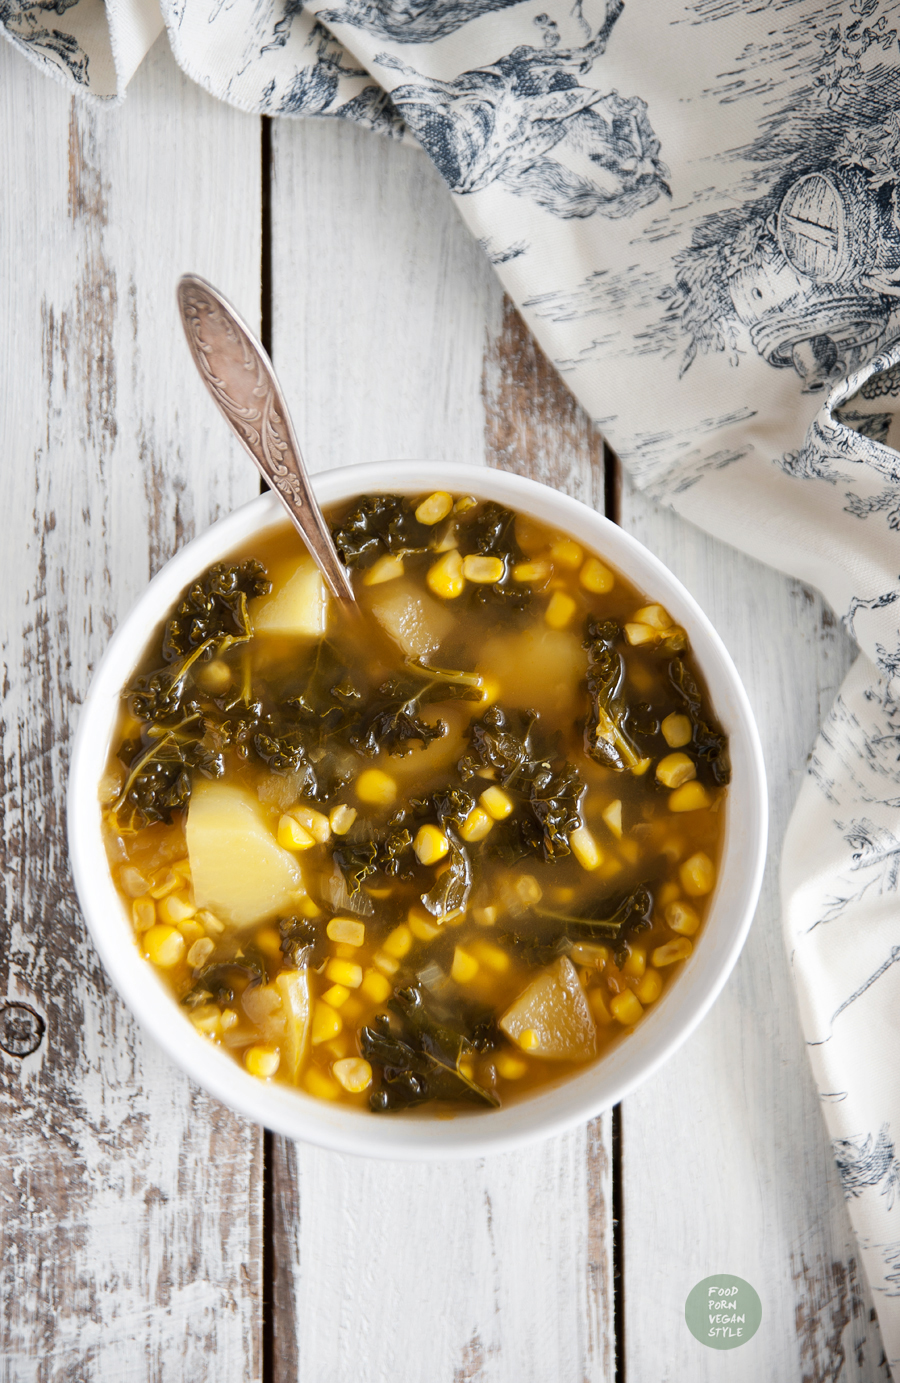 Sweetcorn soup with apples, potatoes and kale